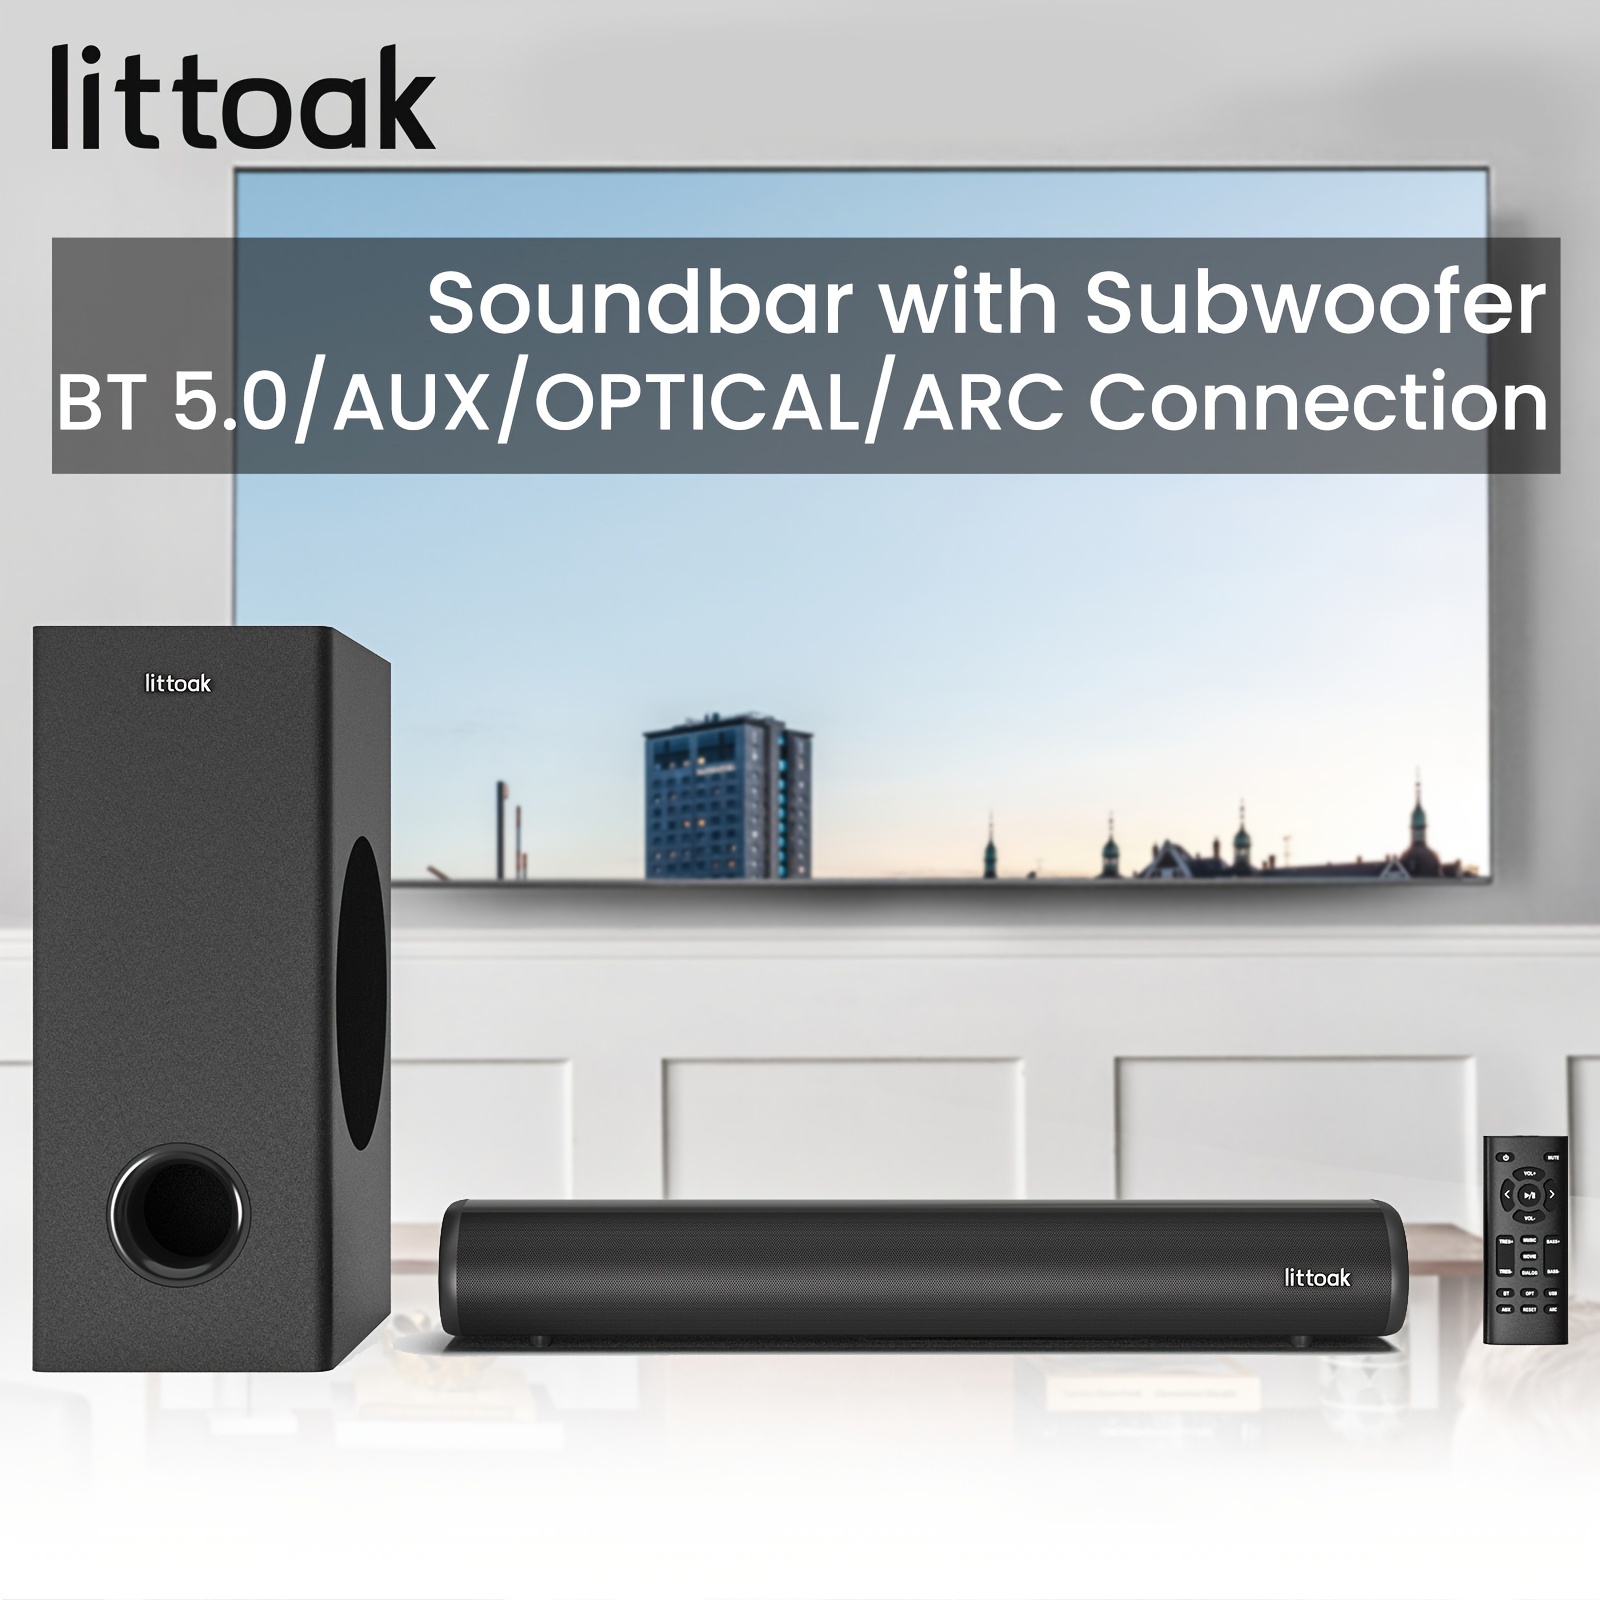 

Soundbar With Subwoofer, 2.1 Soundbar For Tv, Pc, Gaming, Home Audio, Wireless Bt 5.0/arc/optical/aux/usb Connection, Treble/bass Adjustable, Wall Mountable, Remote Control, 16 Inch